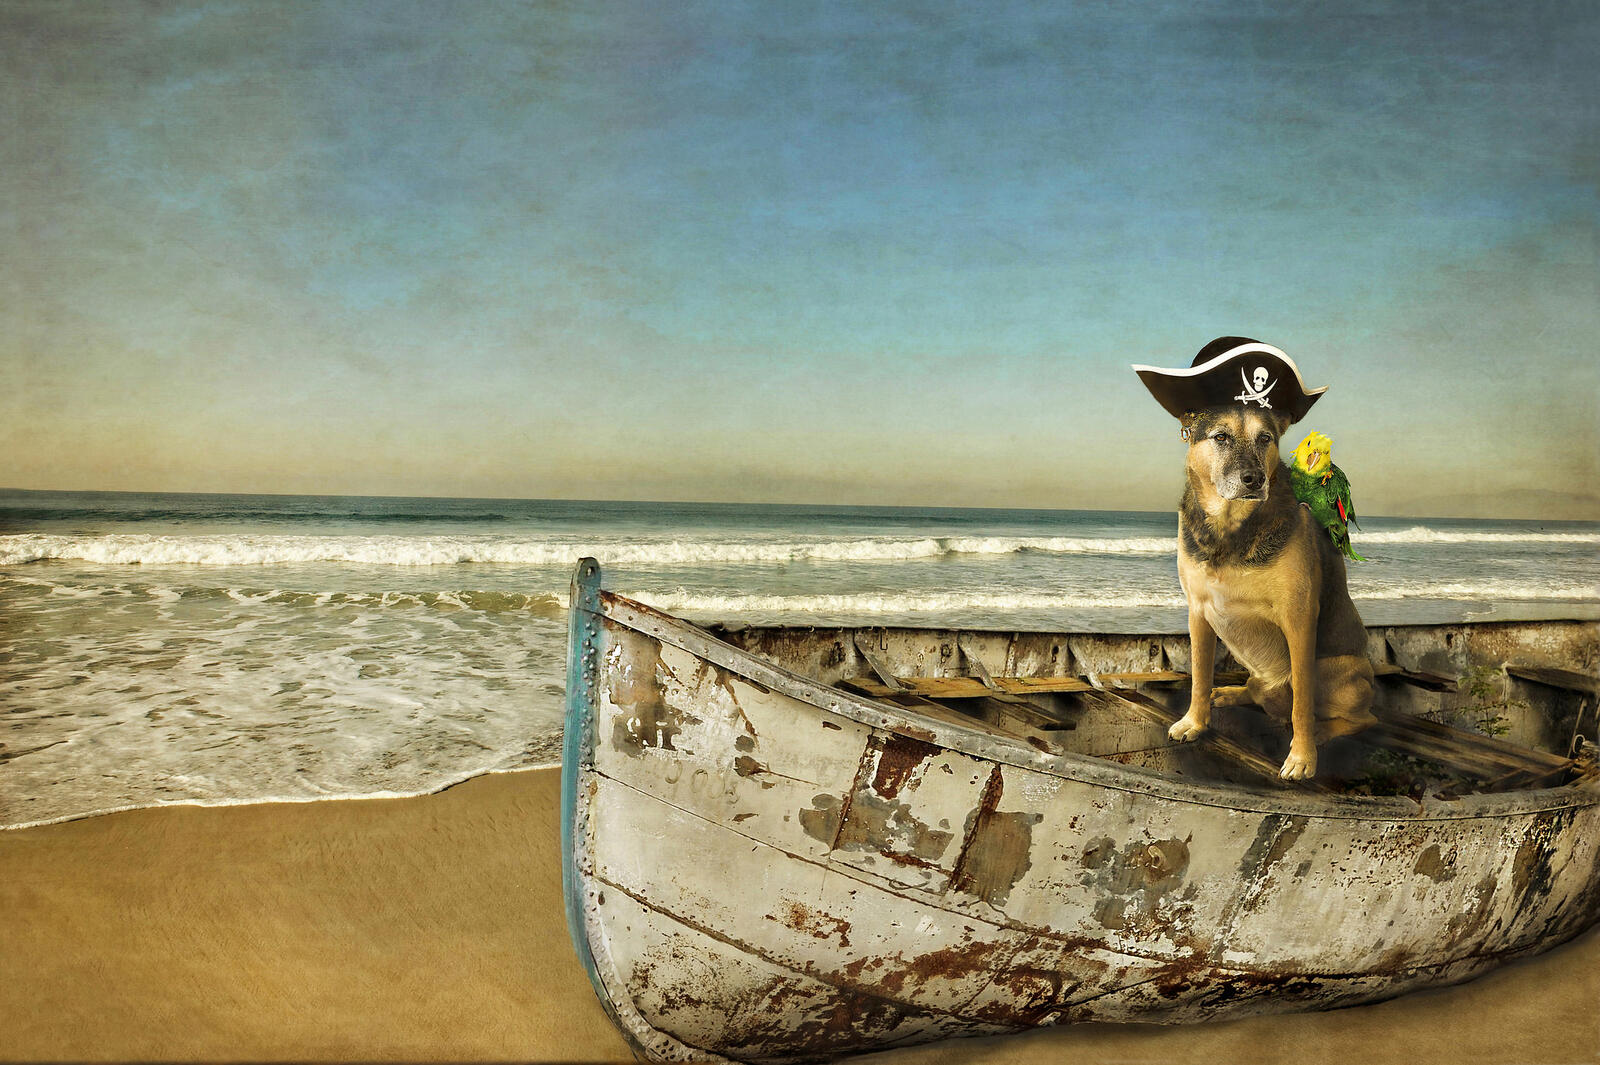 Wallpapers pirate dog shore on the desktop